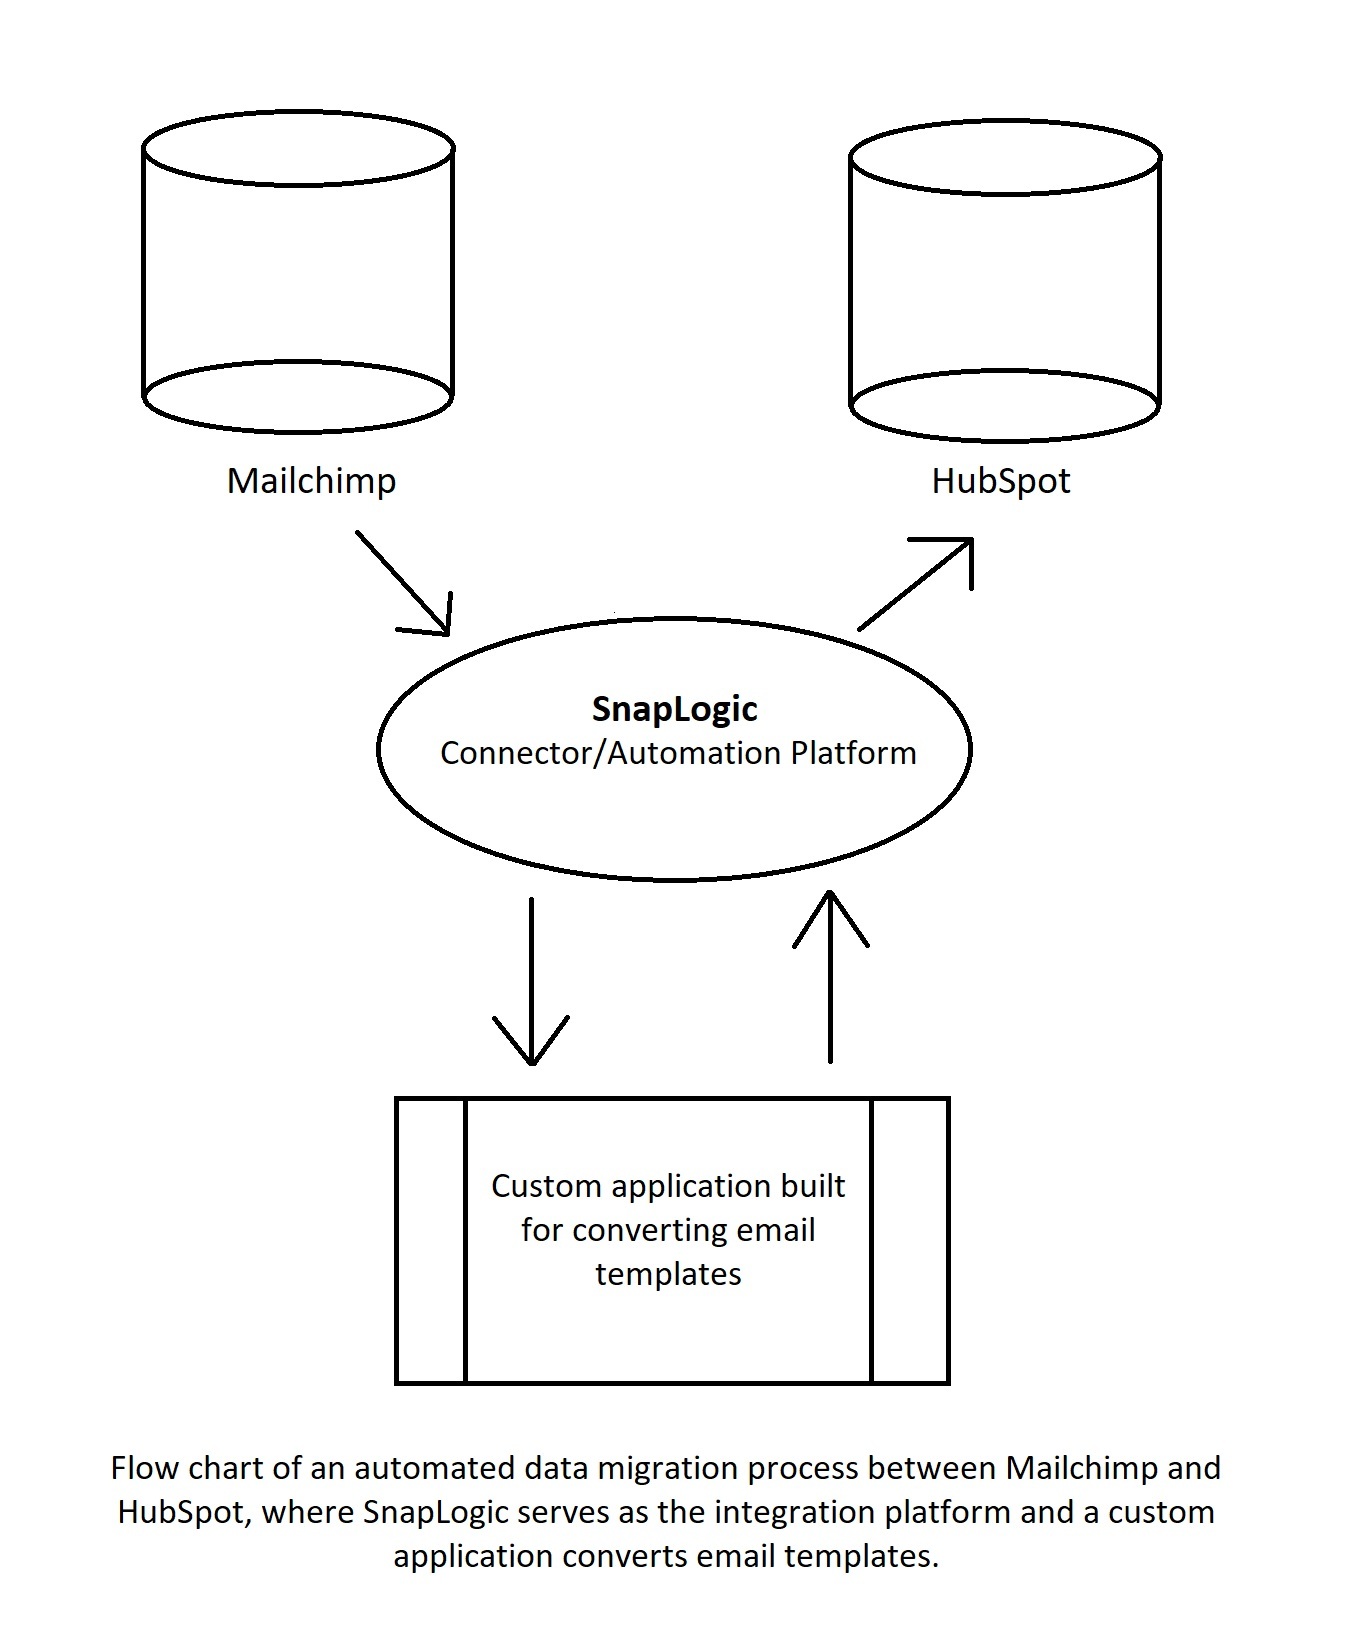 Flow chart of an automated data migration process between Mailchimp and HubSpot